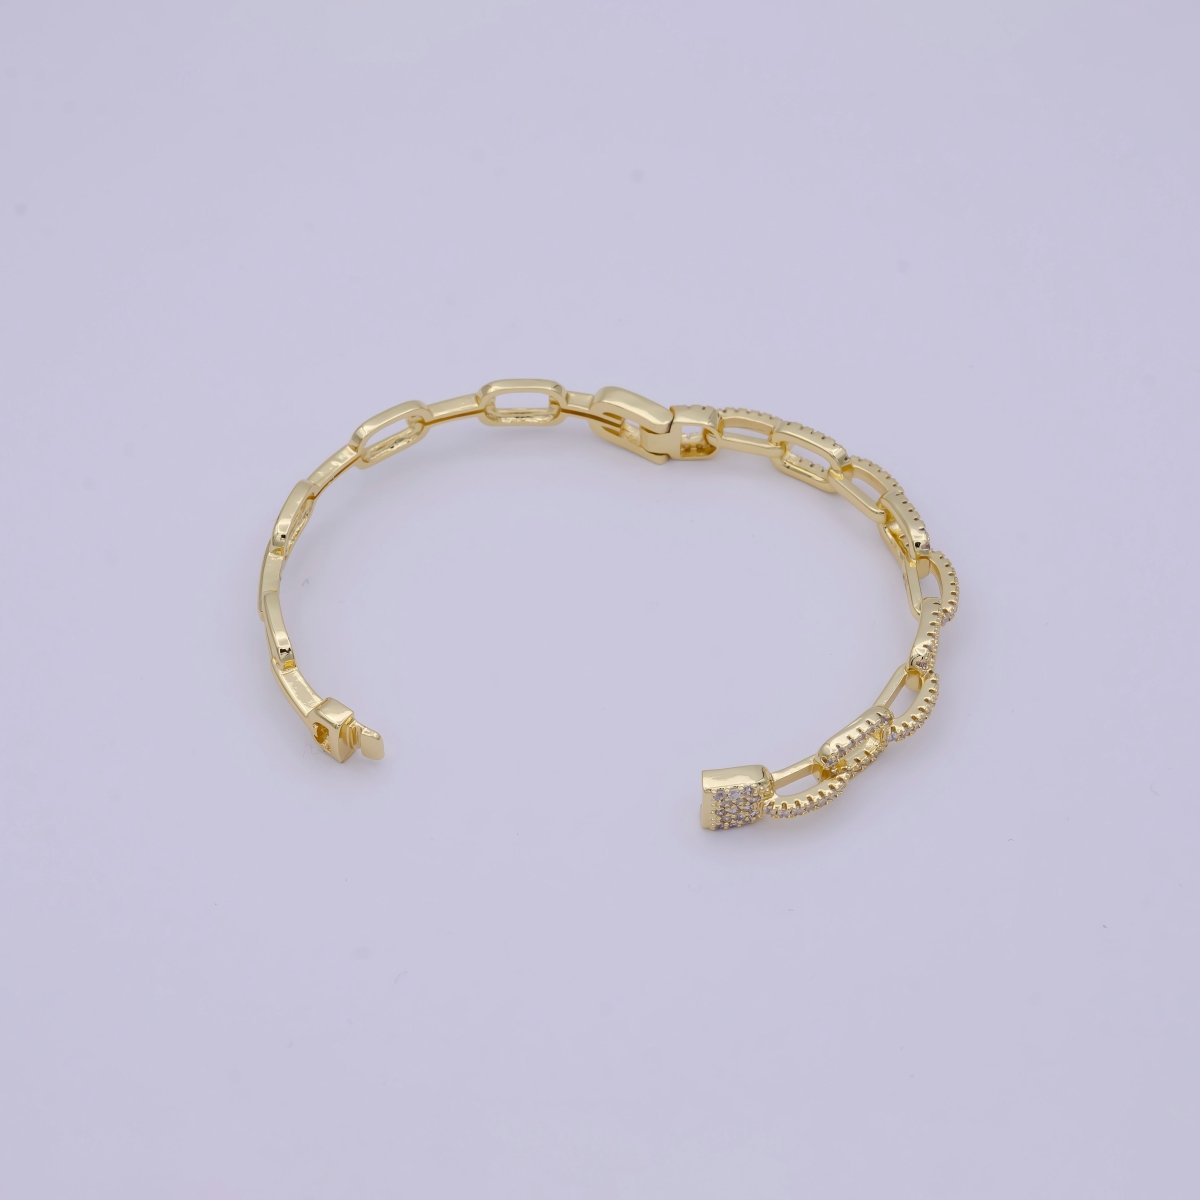 Gold PaperClip Link Chain Bracelet With Cz Stone for Stackable Bangle Jewelry | WA-688 Clearance Pricing - DLUXCA